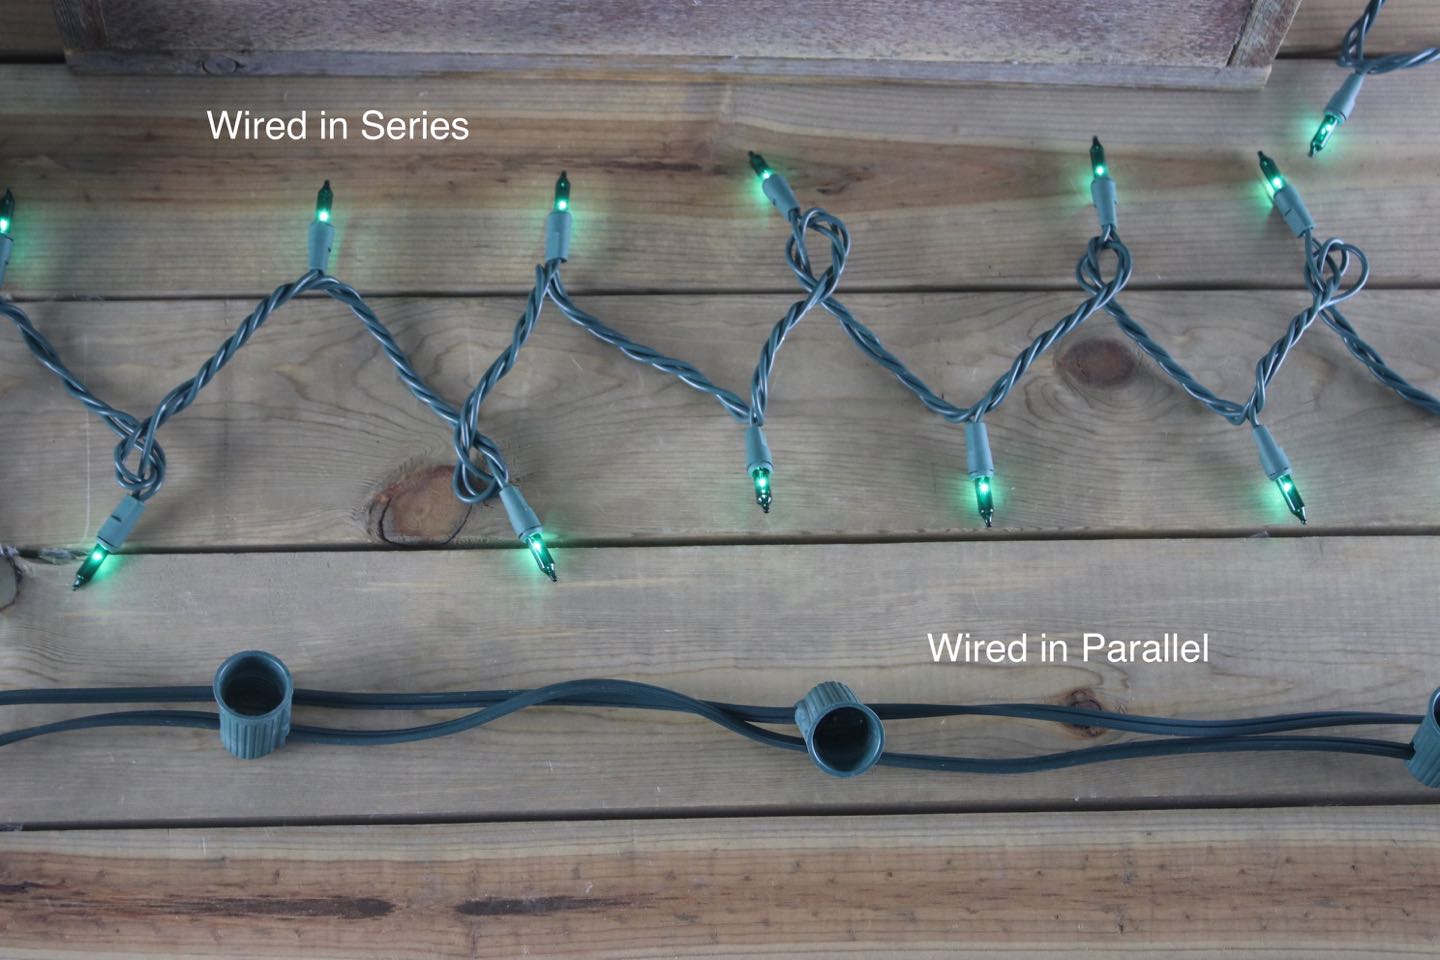 Are Christmas lights in series or parallel? - Christmas ...